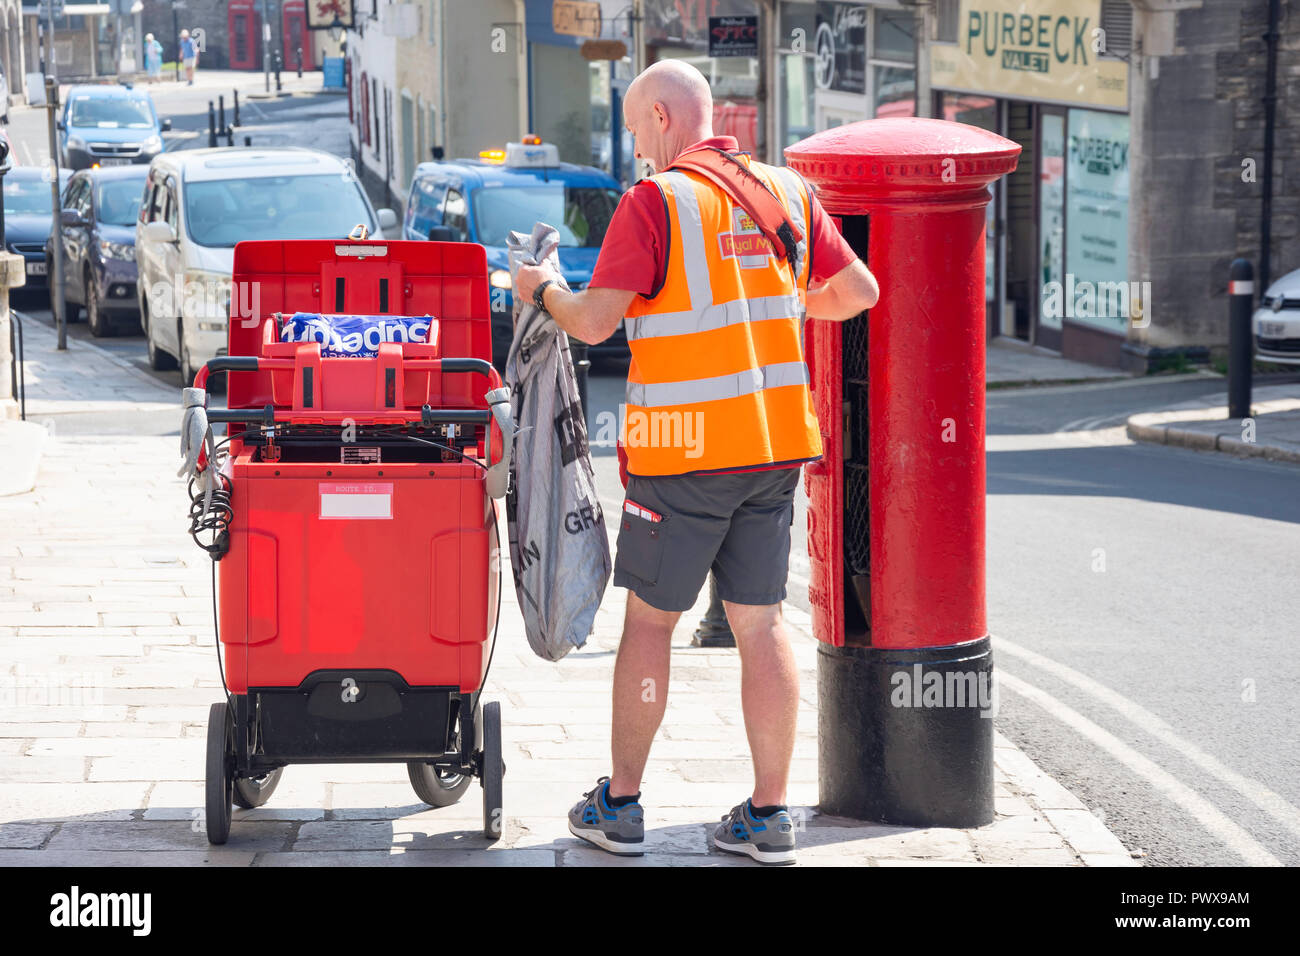 Royal Mail postman emptying a post box, High Street, Swanage, Isle of Purbeck, Dorset, England, United Kingdom Stock Photo